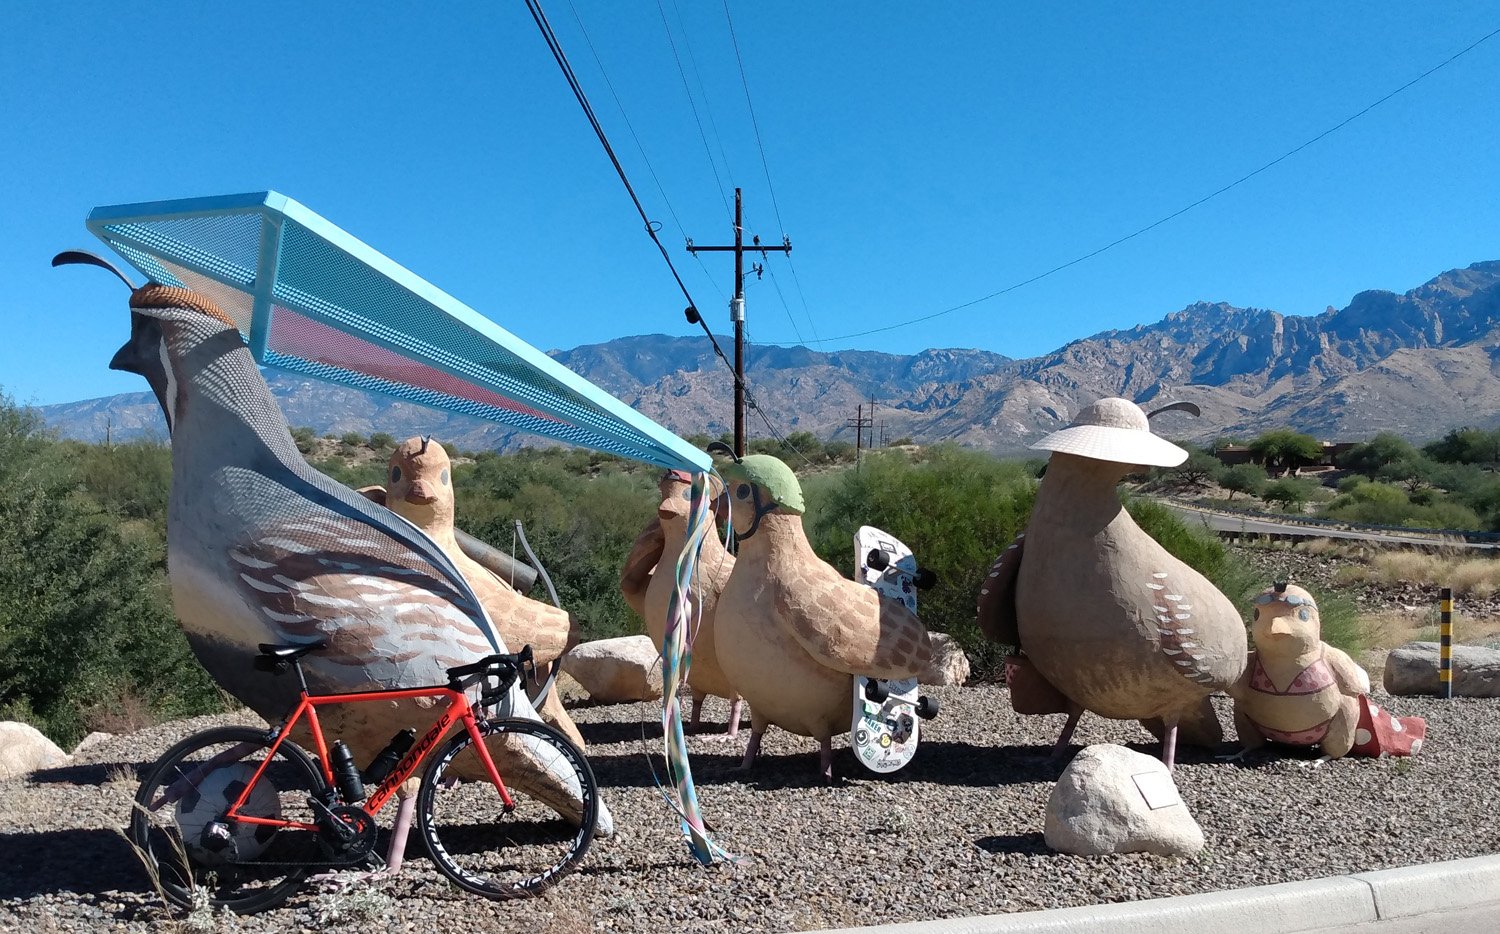 This one is great, large quail family installation. 65km ride for this picture. Worth.